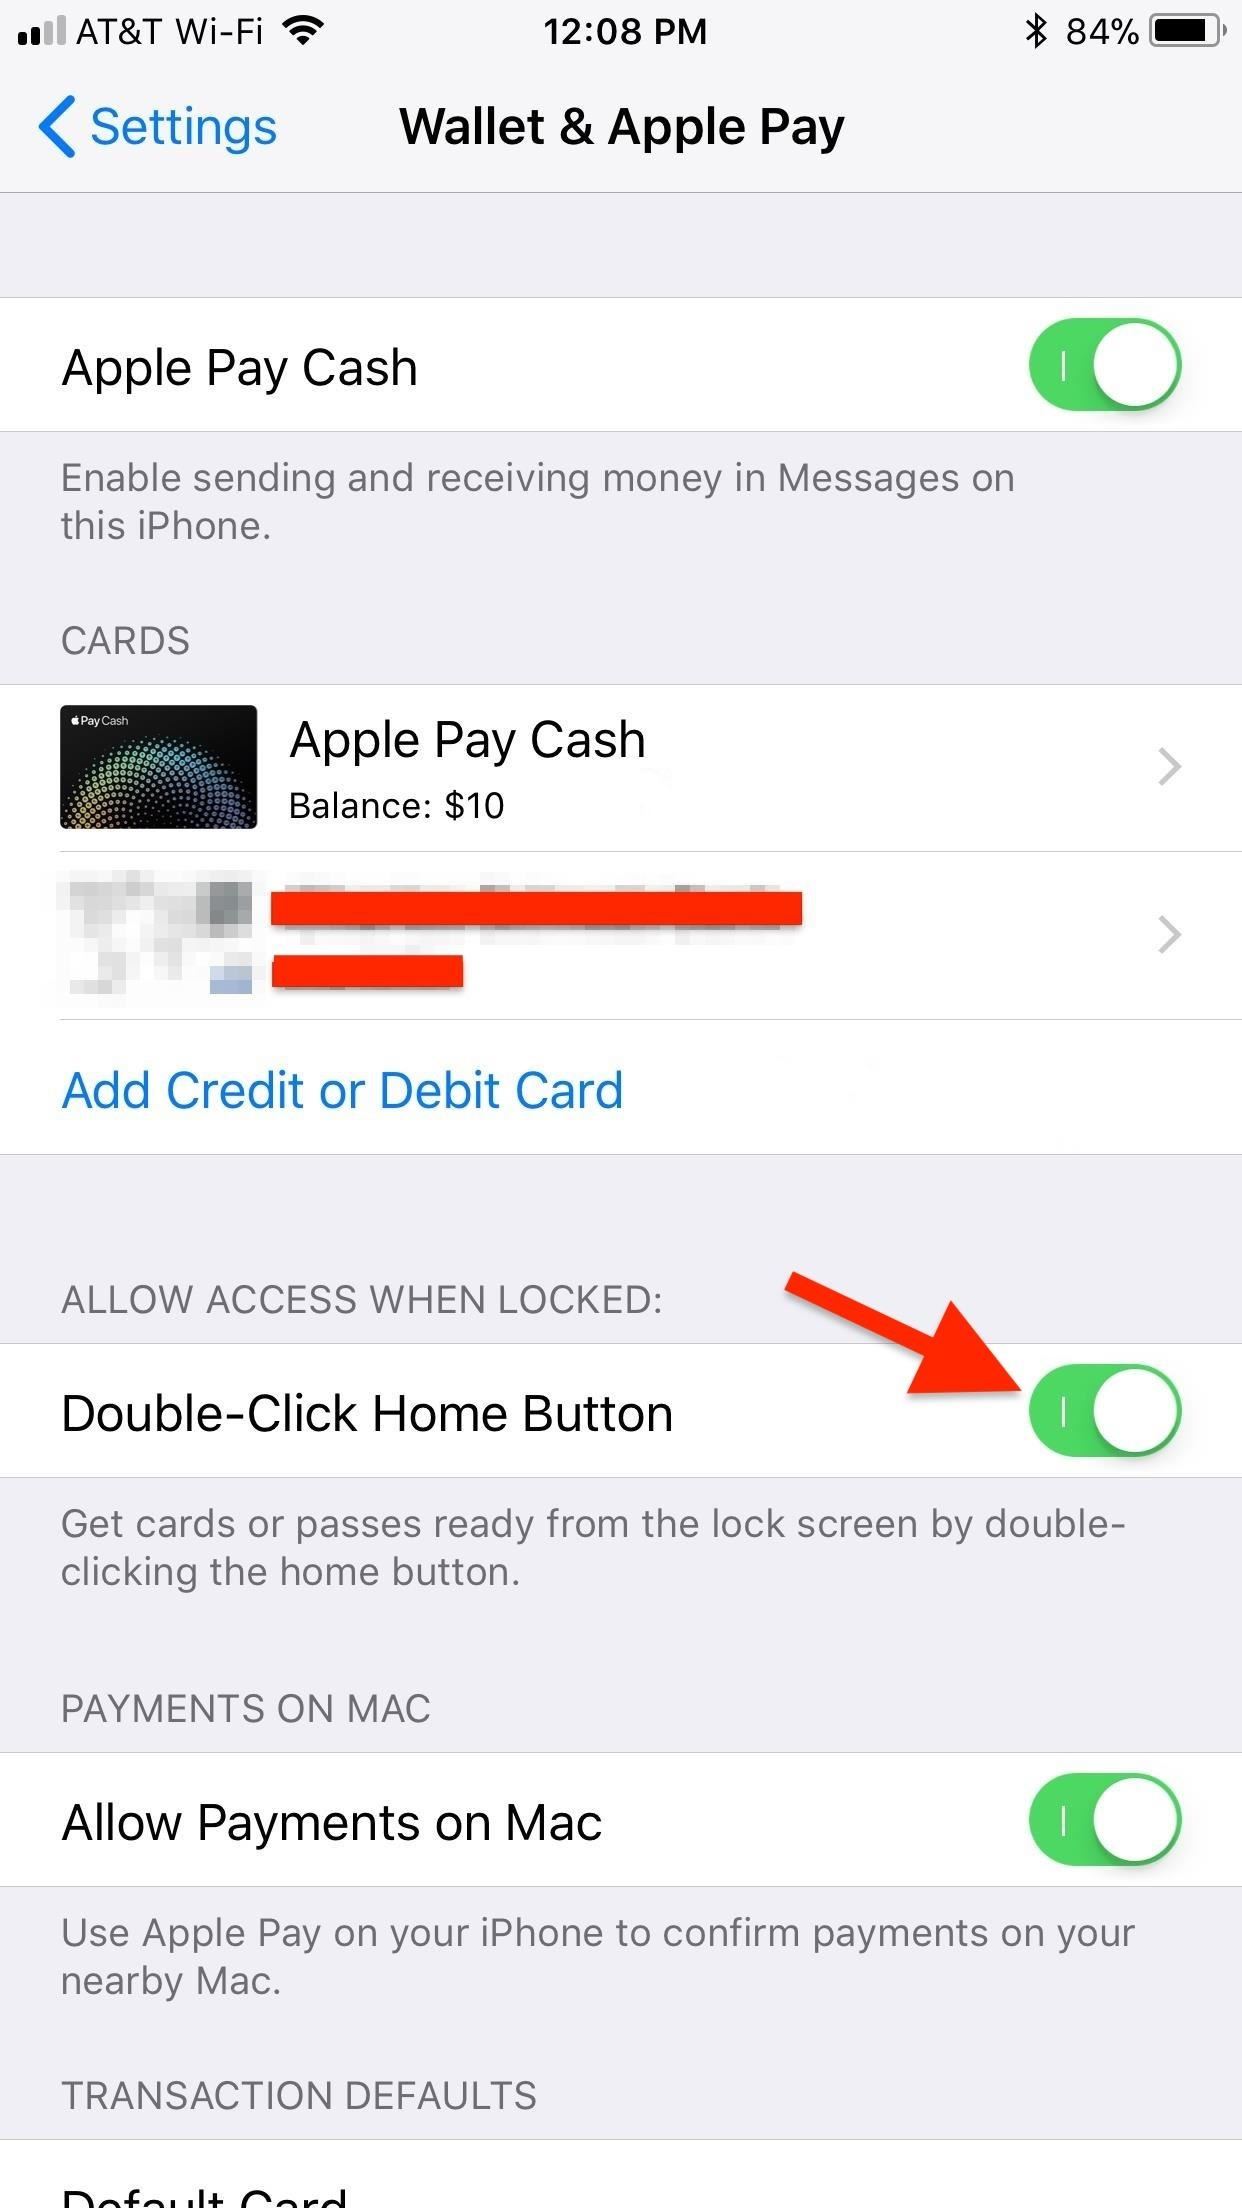 Apple Pay Cash 101: How to Quickly Access Your Card on the Lock Screen